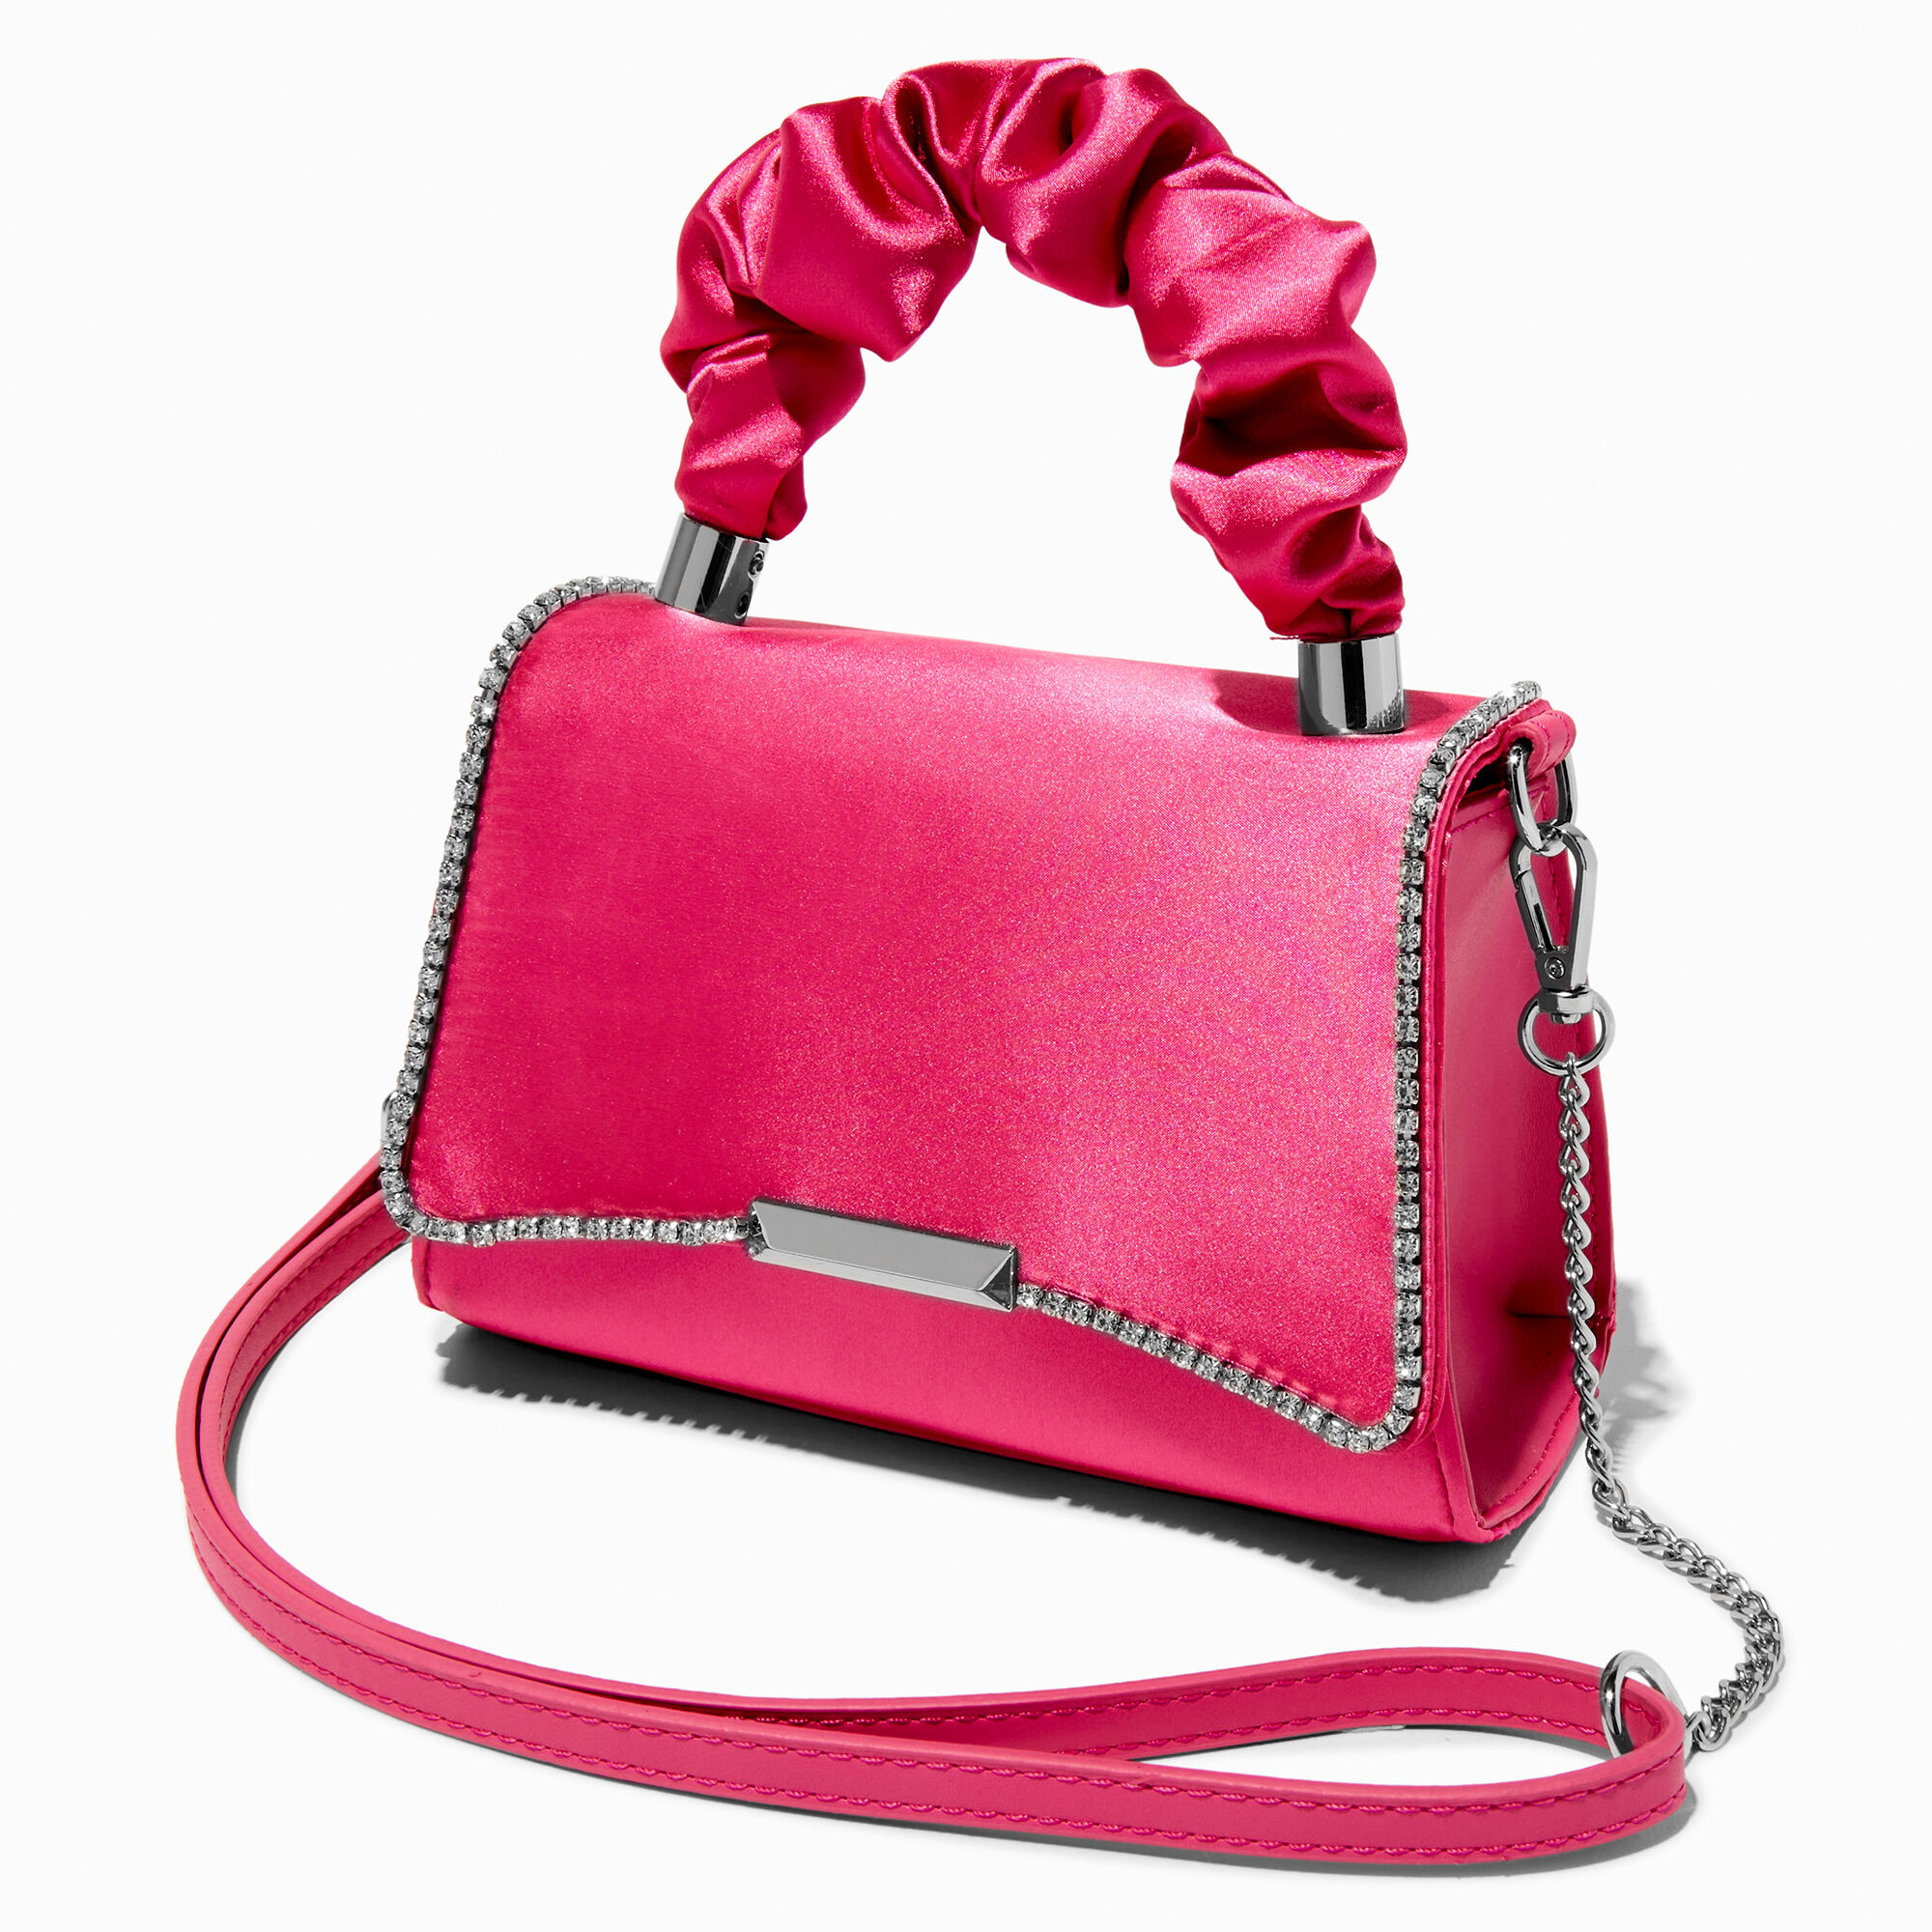 View Claires Bling Trim Ruched Handle Crossbody Bag Fuchsia information